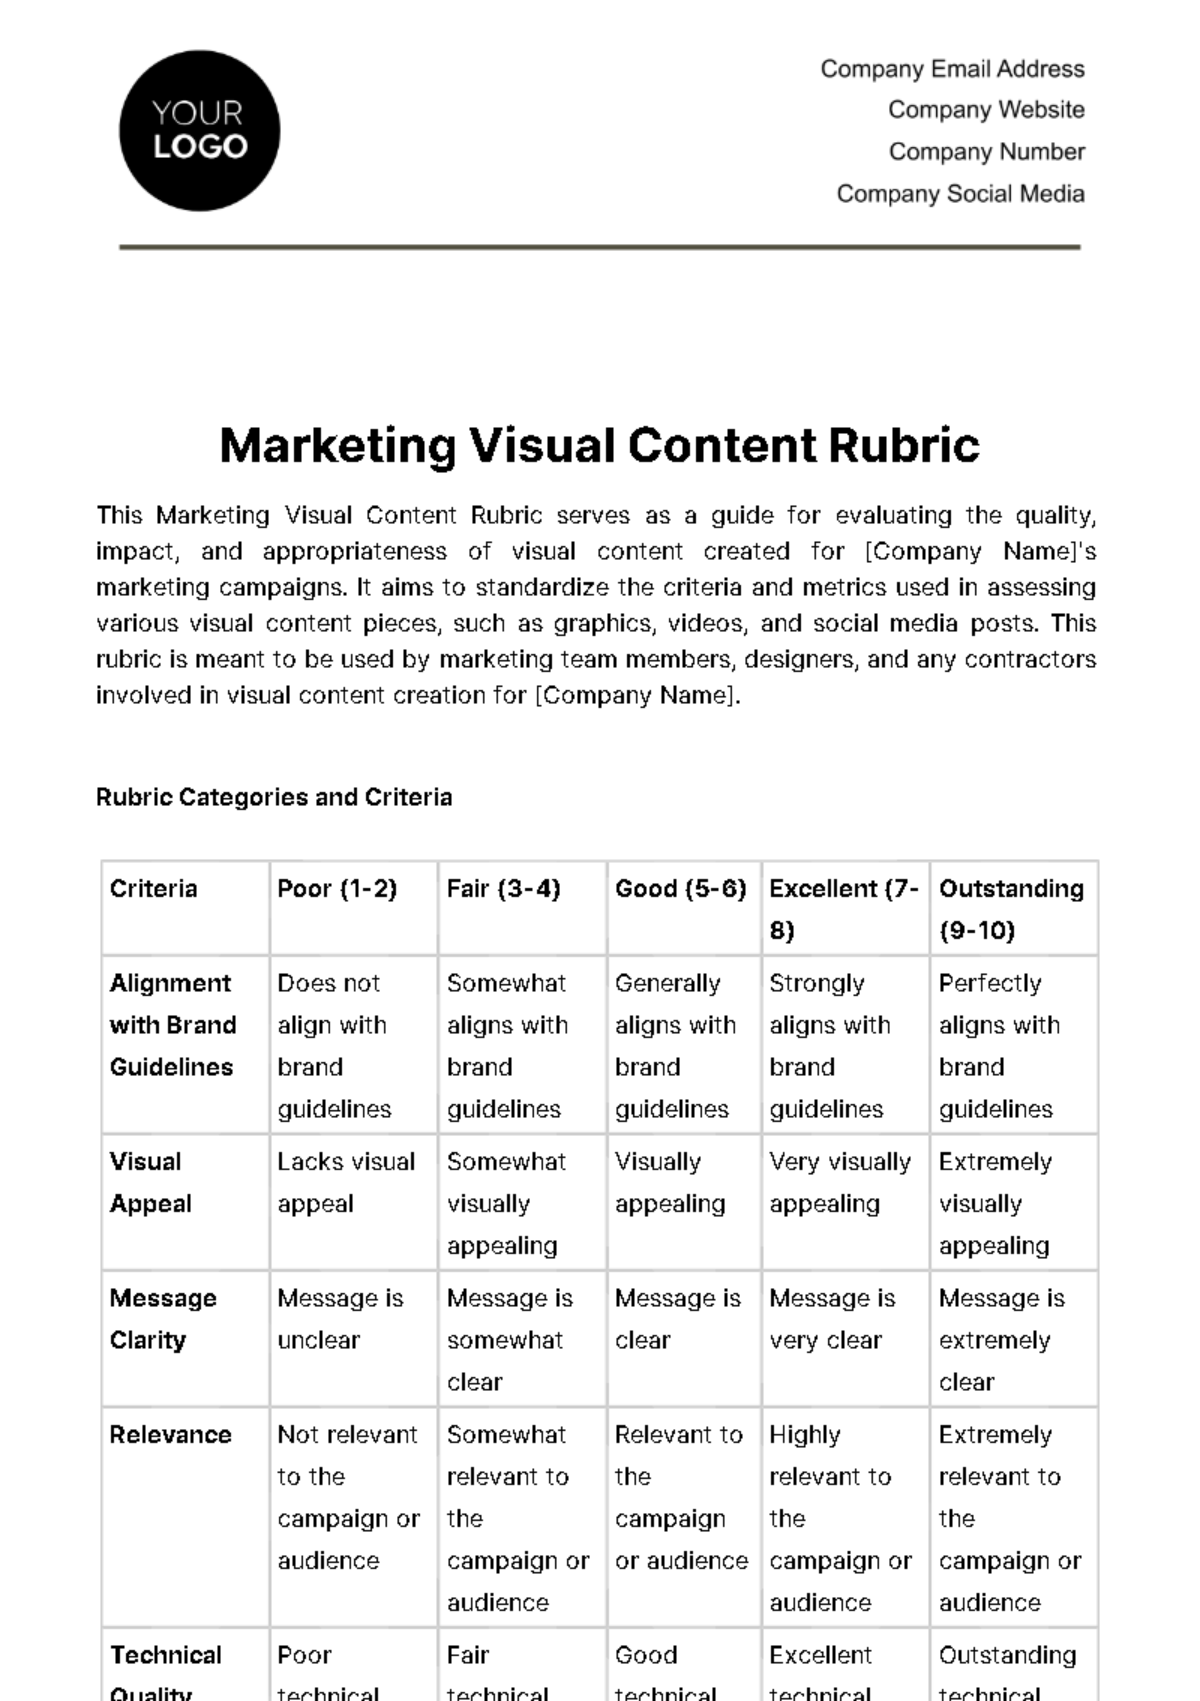 Free Marketing Visual Content Rubric Template